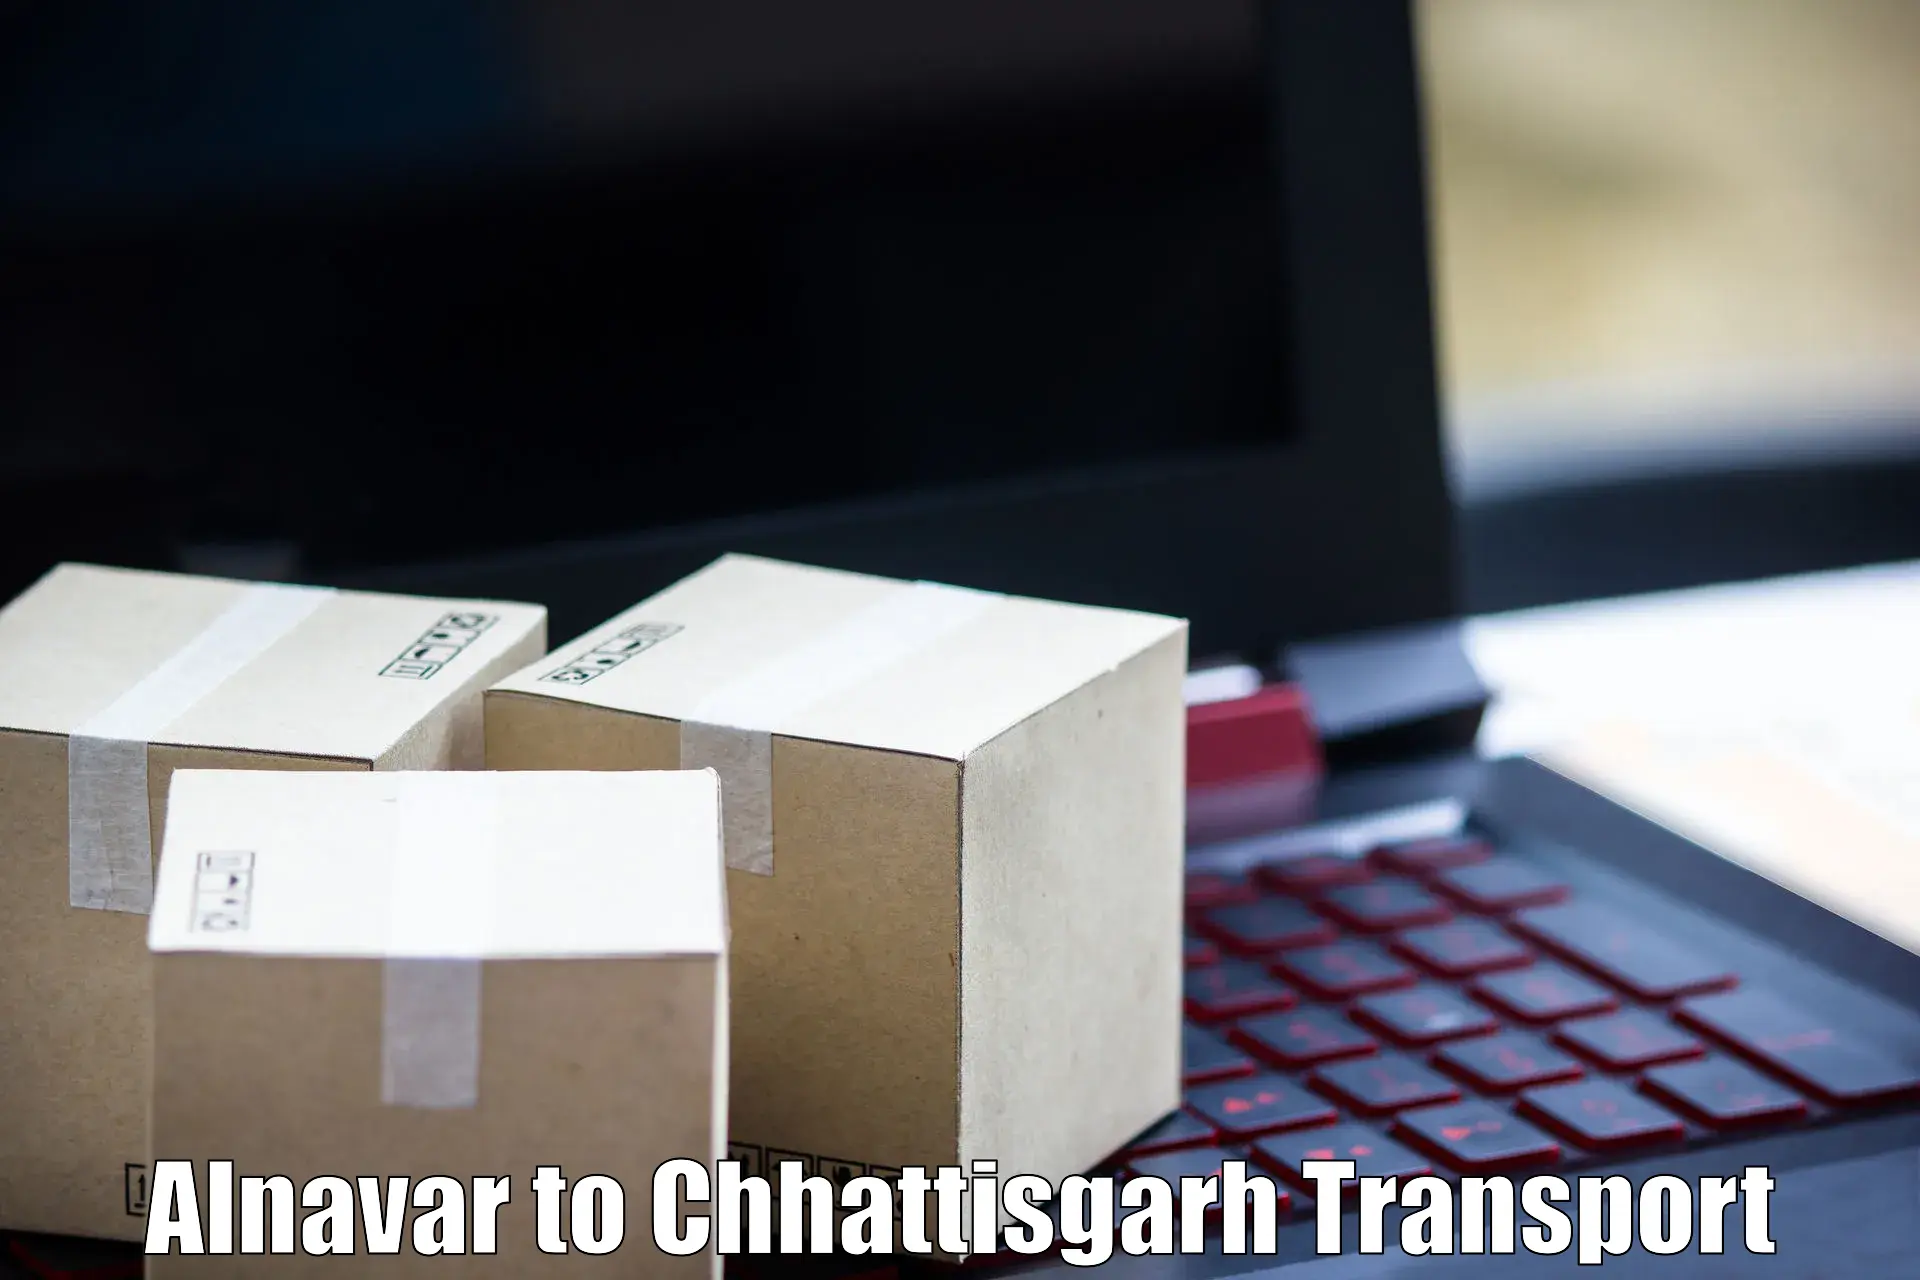 Package delivery services in Alnavar to Raigarh